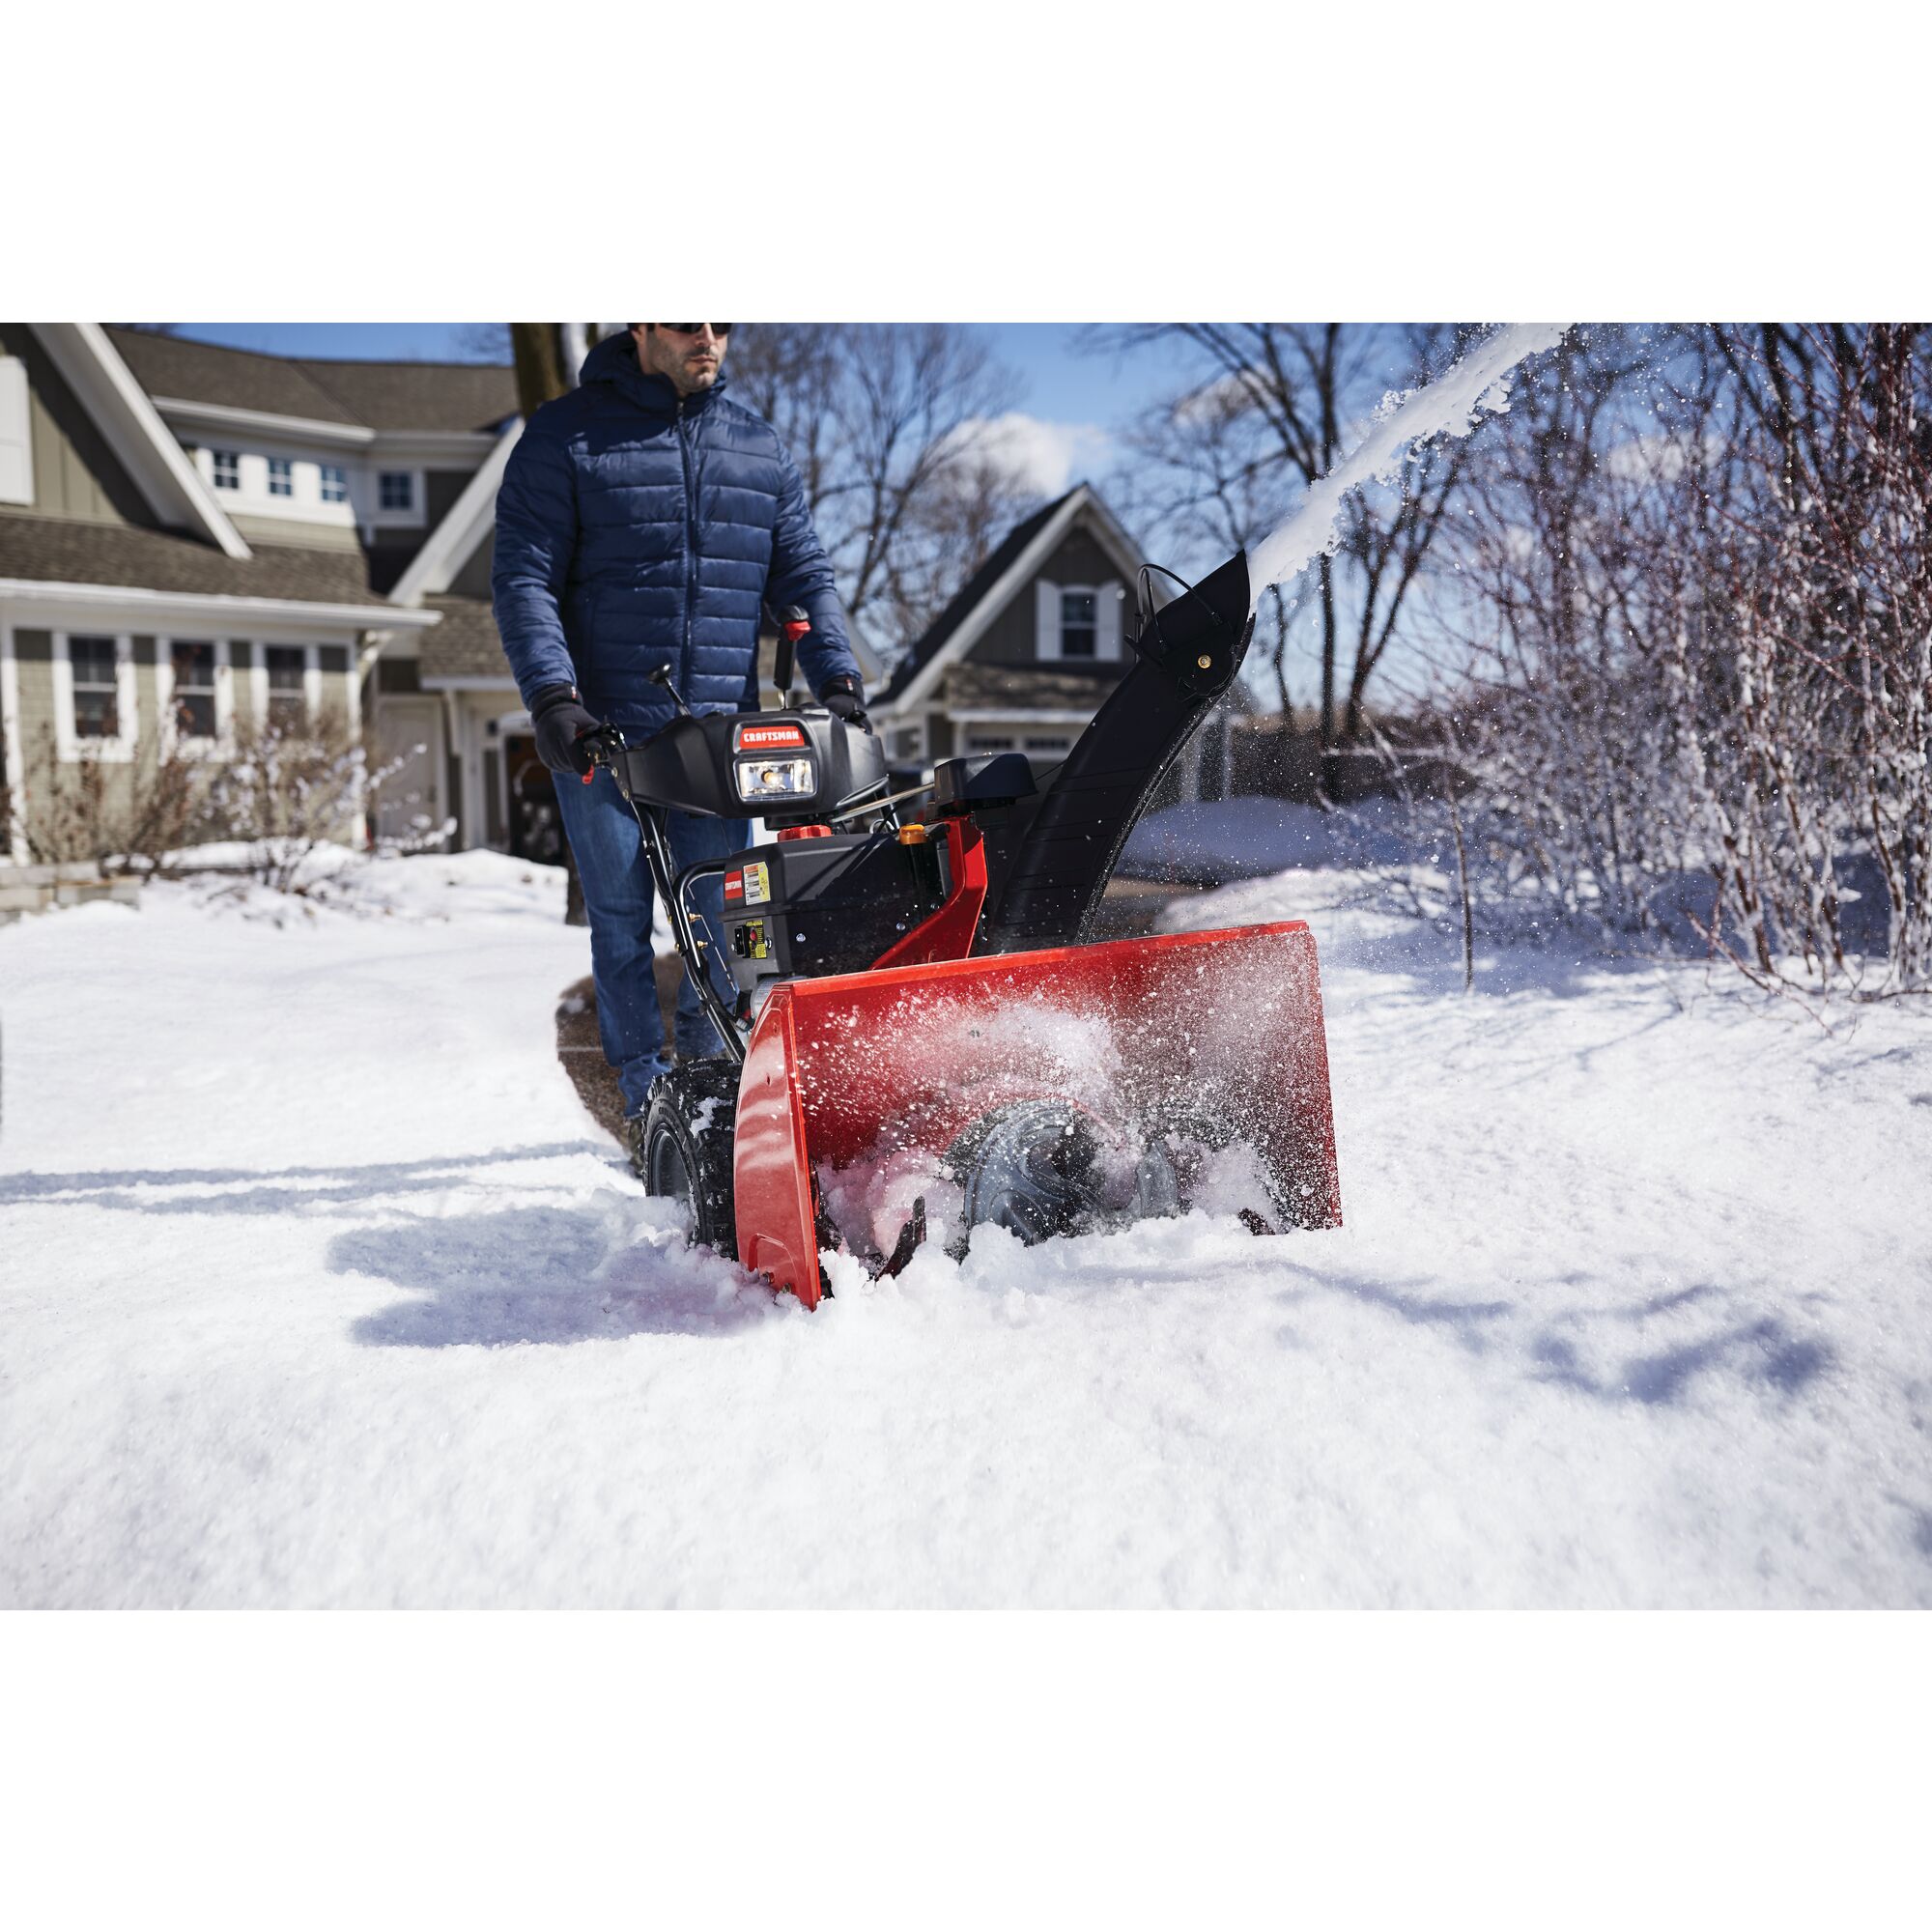 CRAFTSMAN Electric Start 3-Stage Snow Blower blowing the snow in a yard in front view in blue jacket